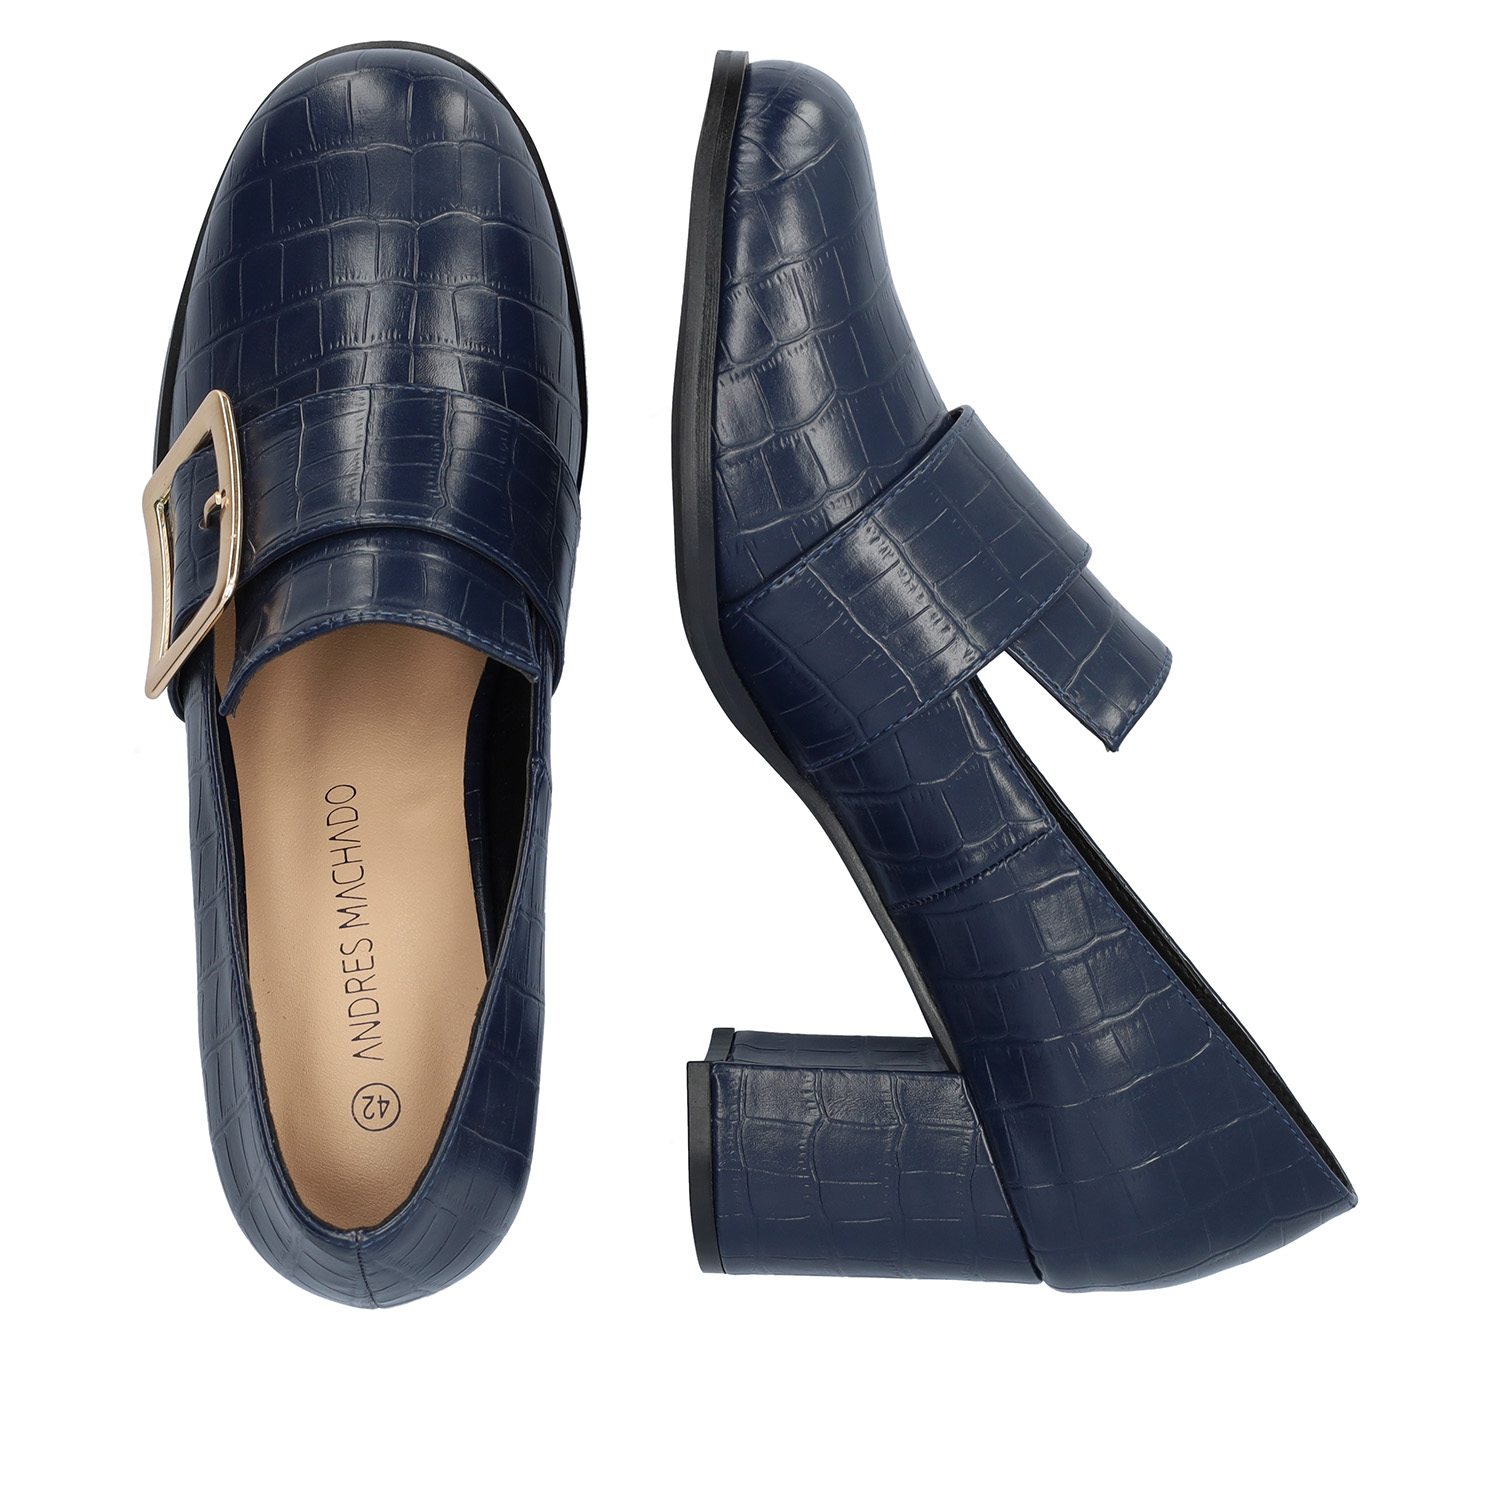 Moccasins in navy faux croc leather and buckle detail 